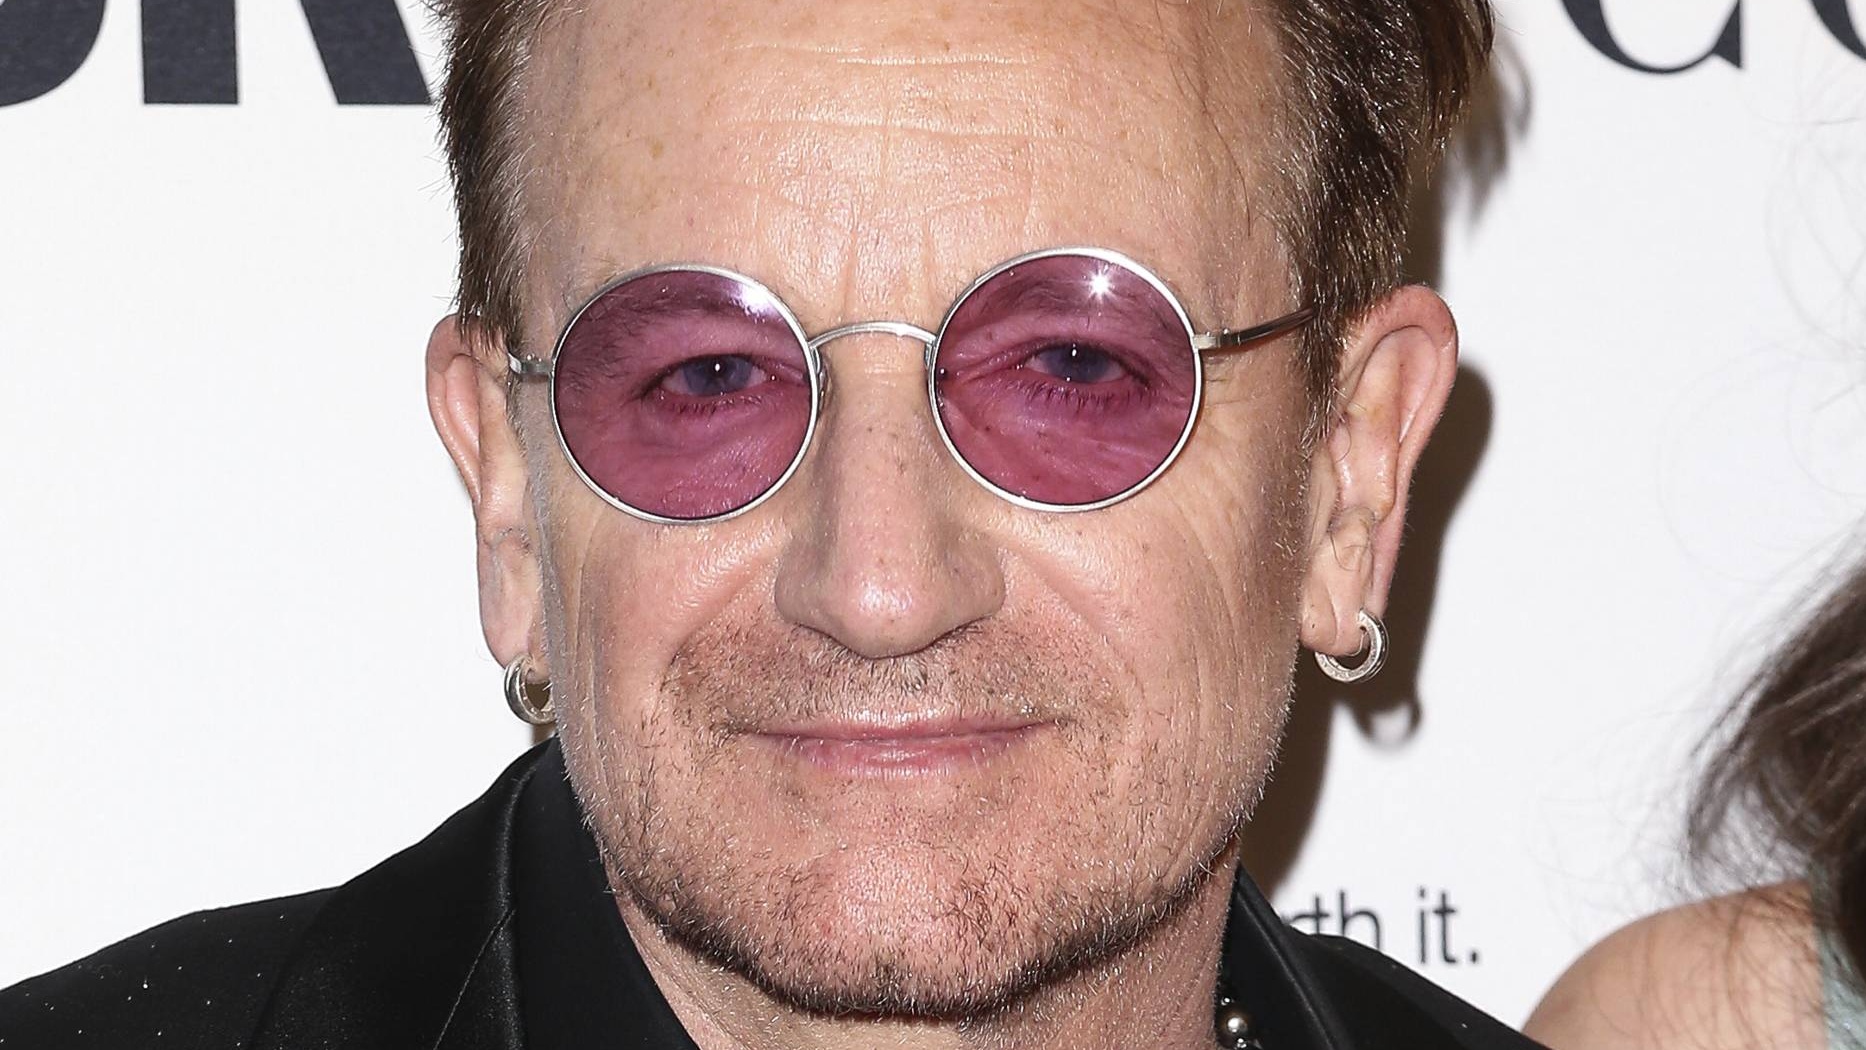 U2 To Make History With First Broadcast From Las Vegas' Sphere For The Grammys